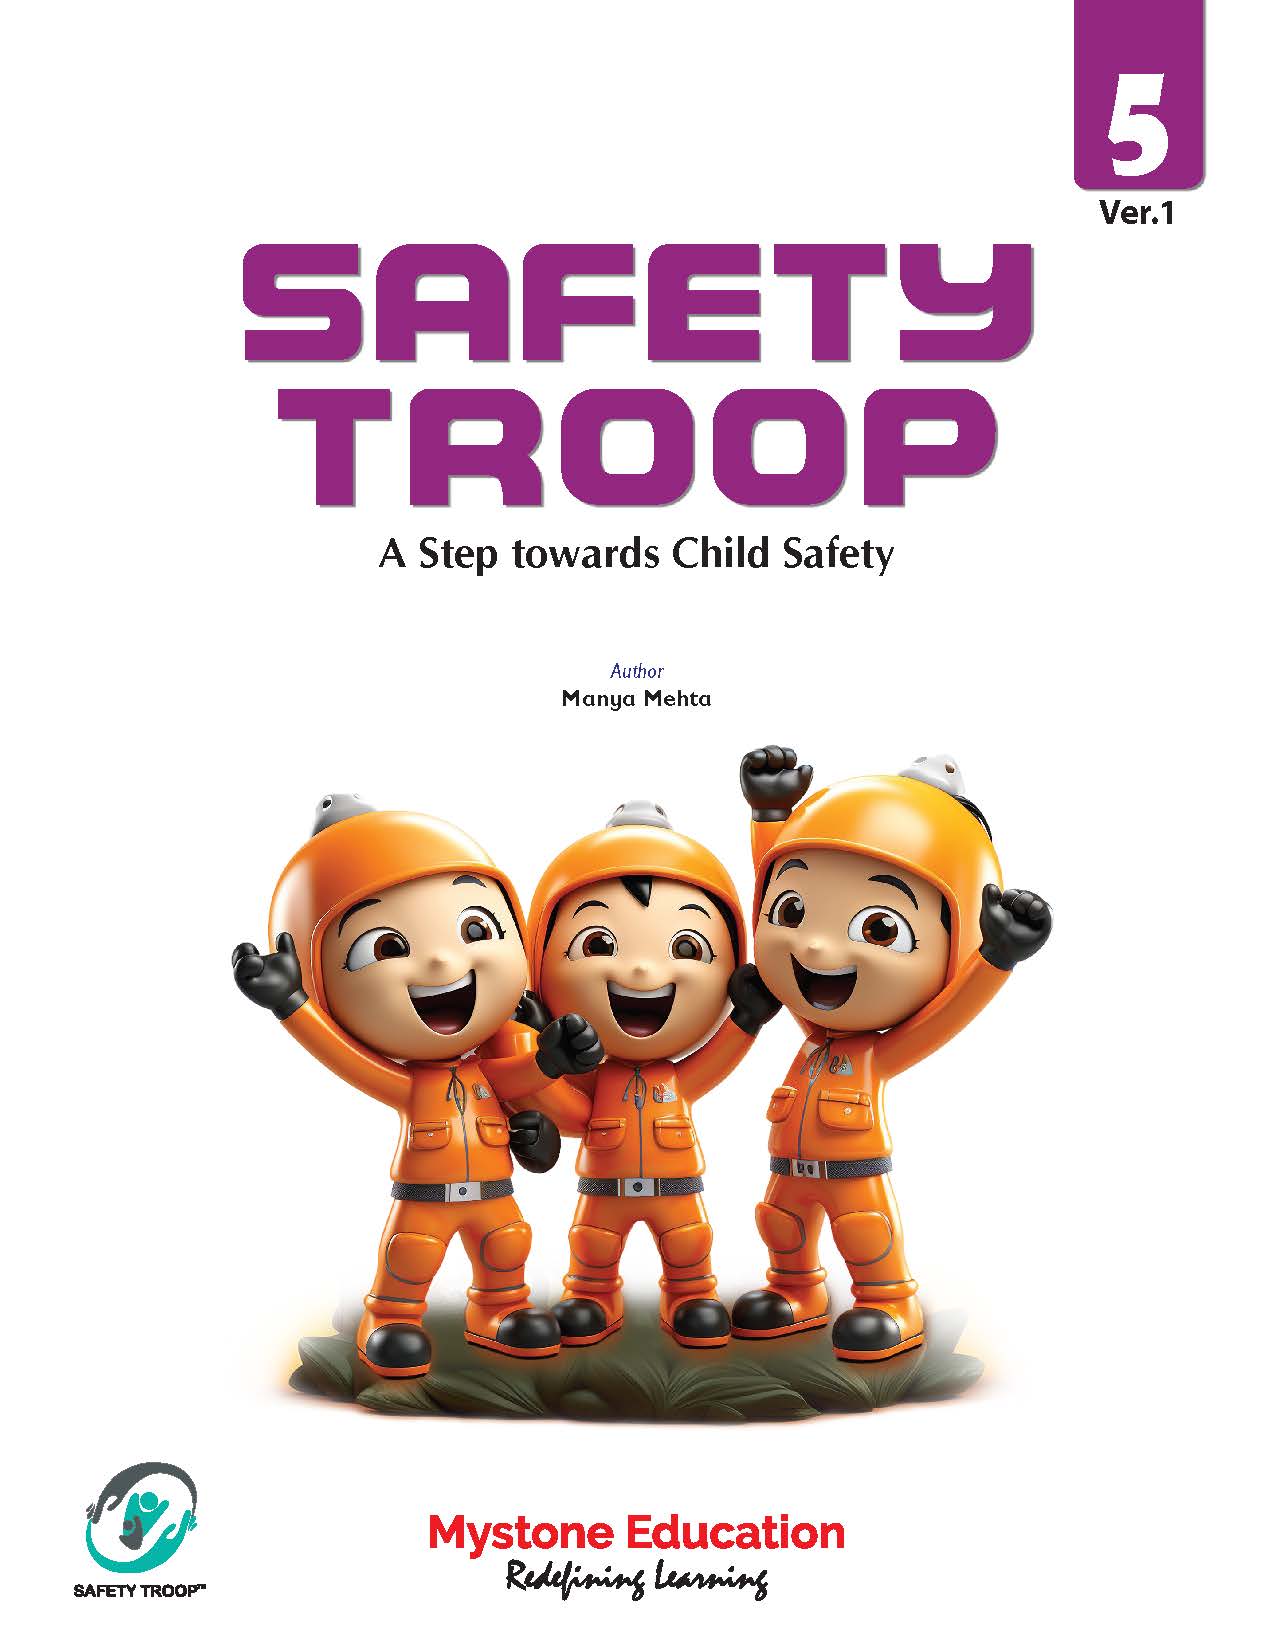 Safety Troop (A Step Towards Child Safety) Class 5 Ver 1